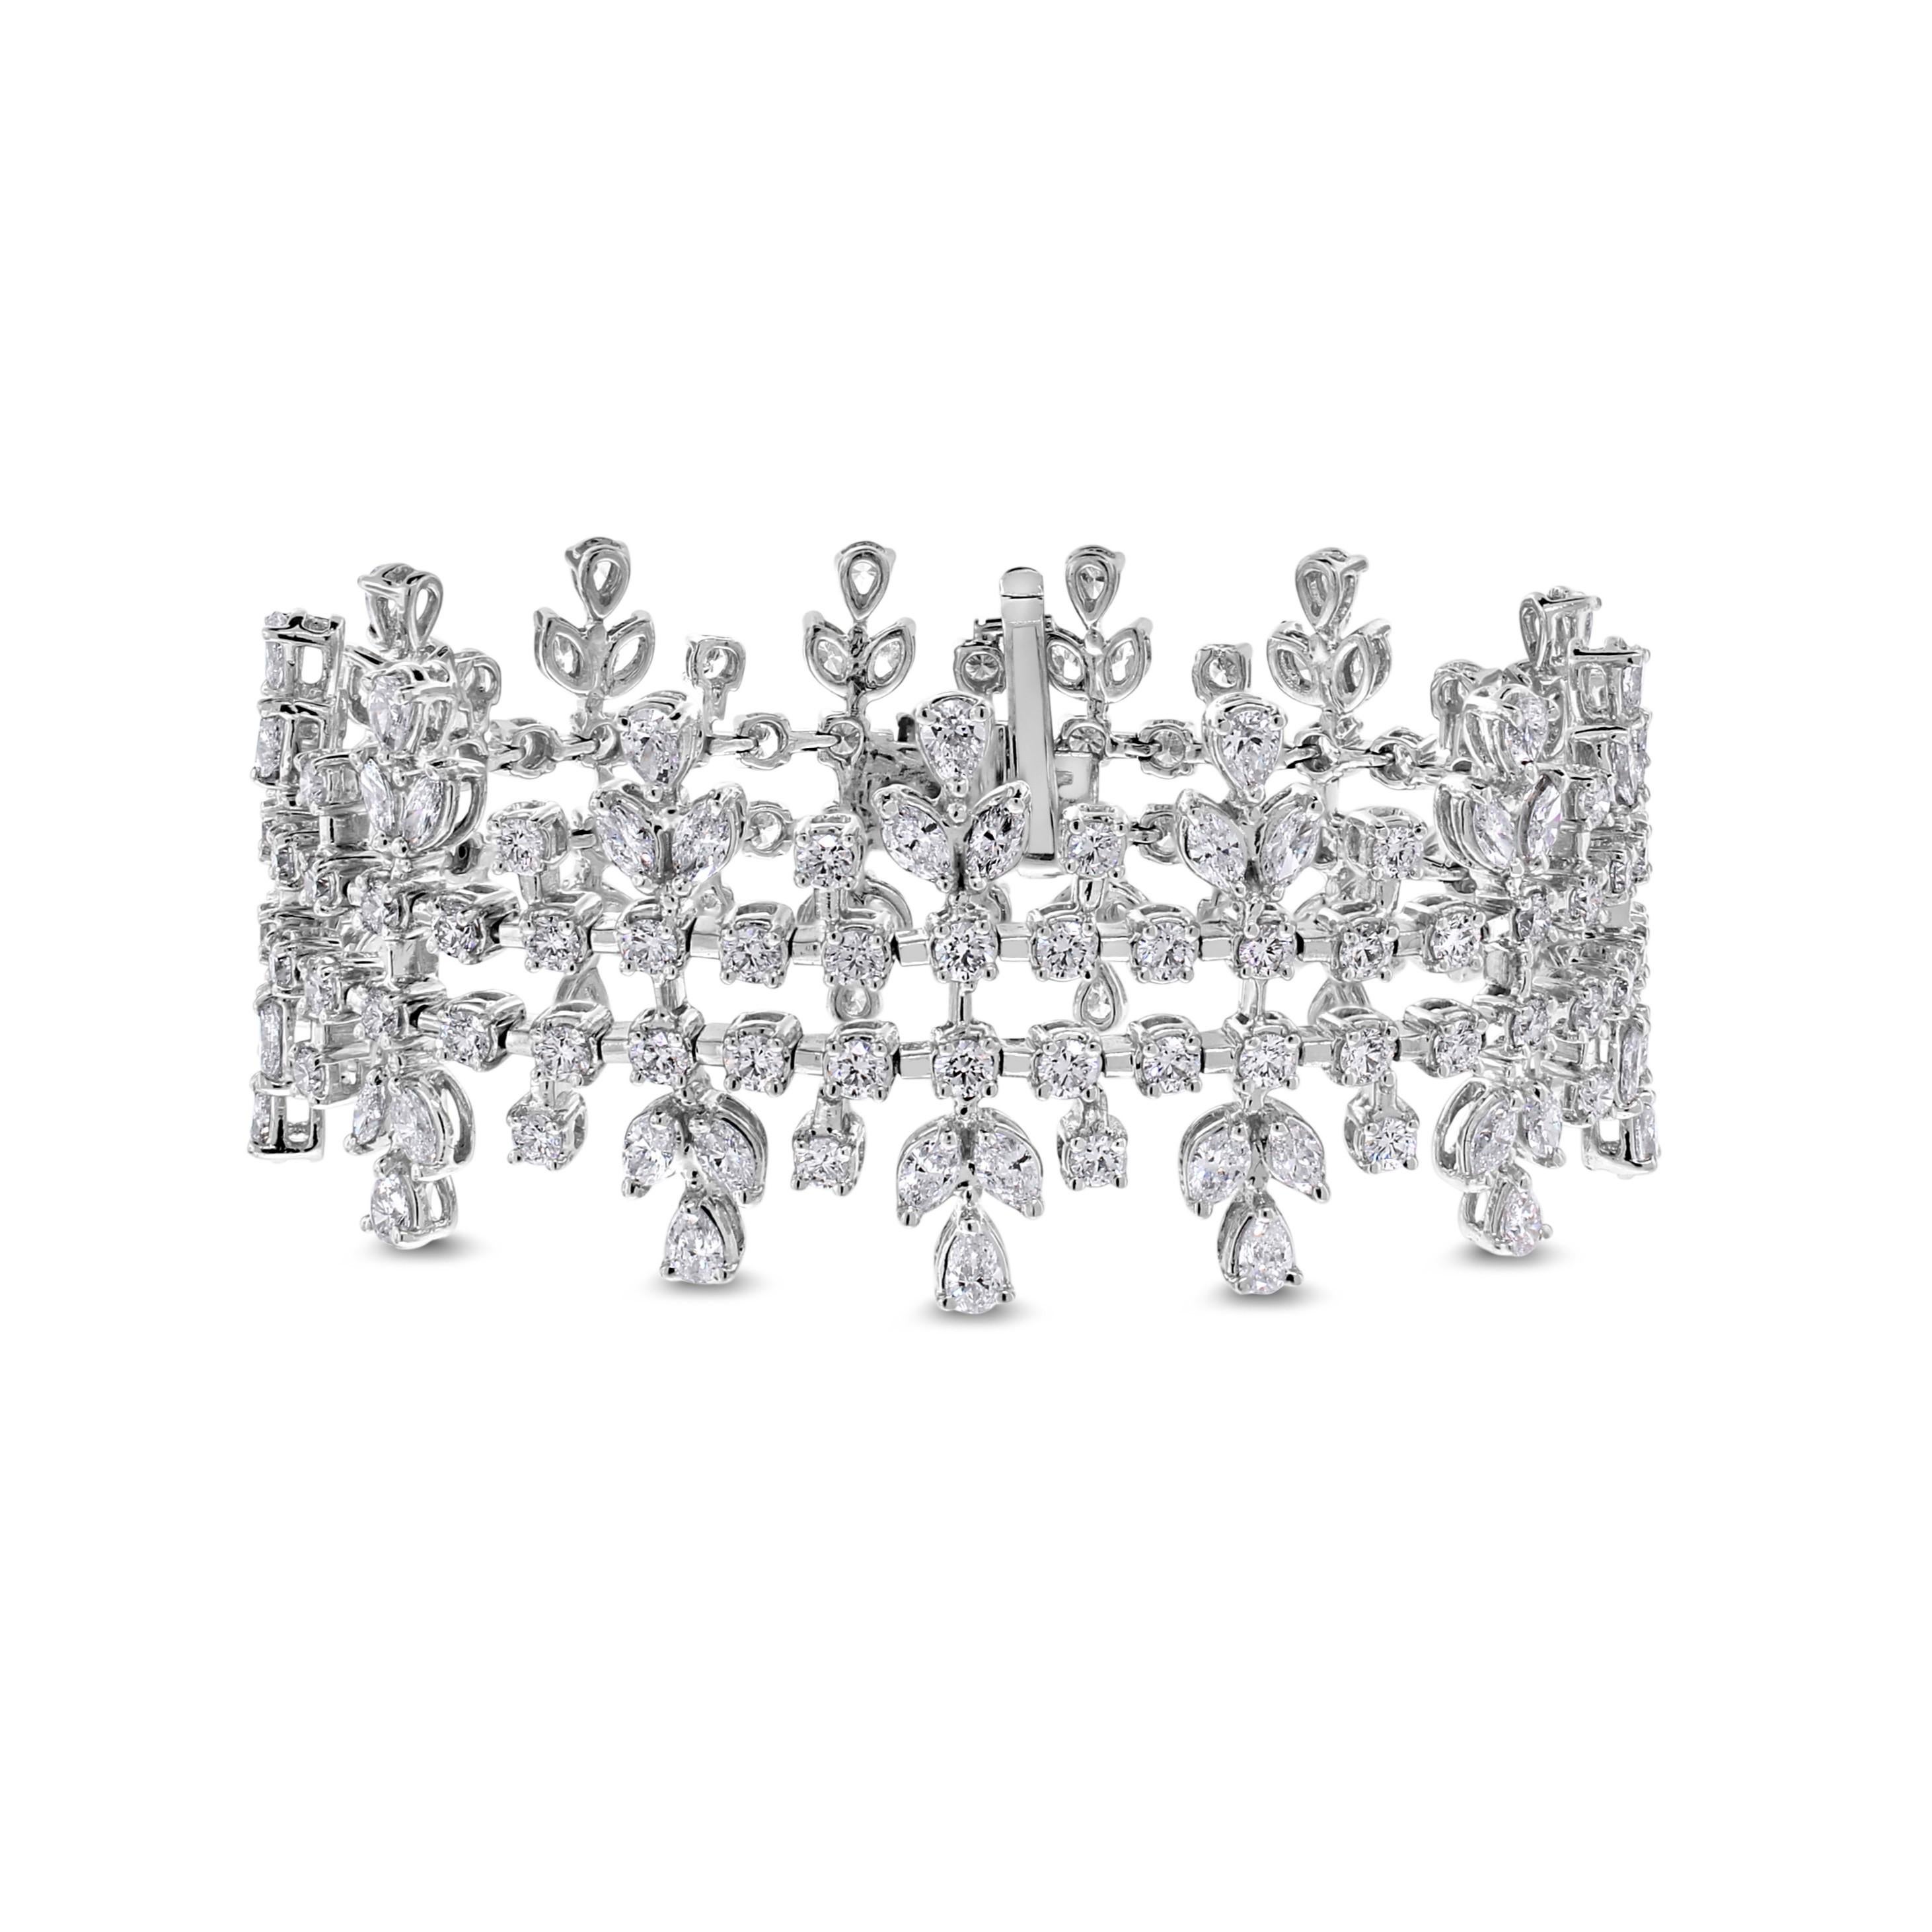 Contemporary Beauvince Eloise Diamond Bracelet (9.29 ct Diamonds) in White Gold For Sale